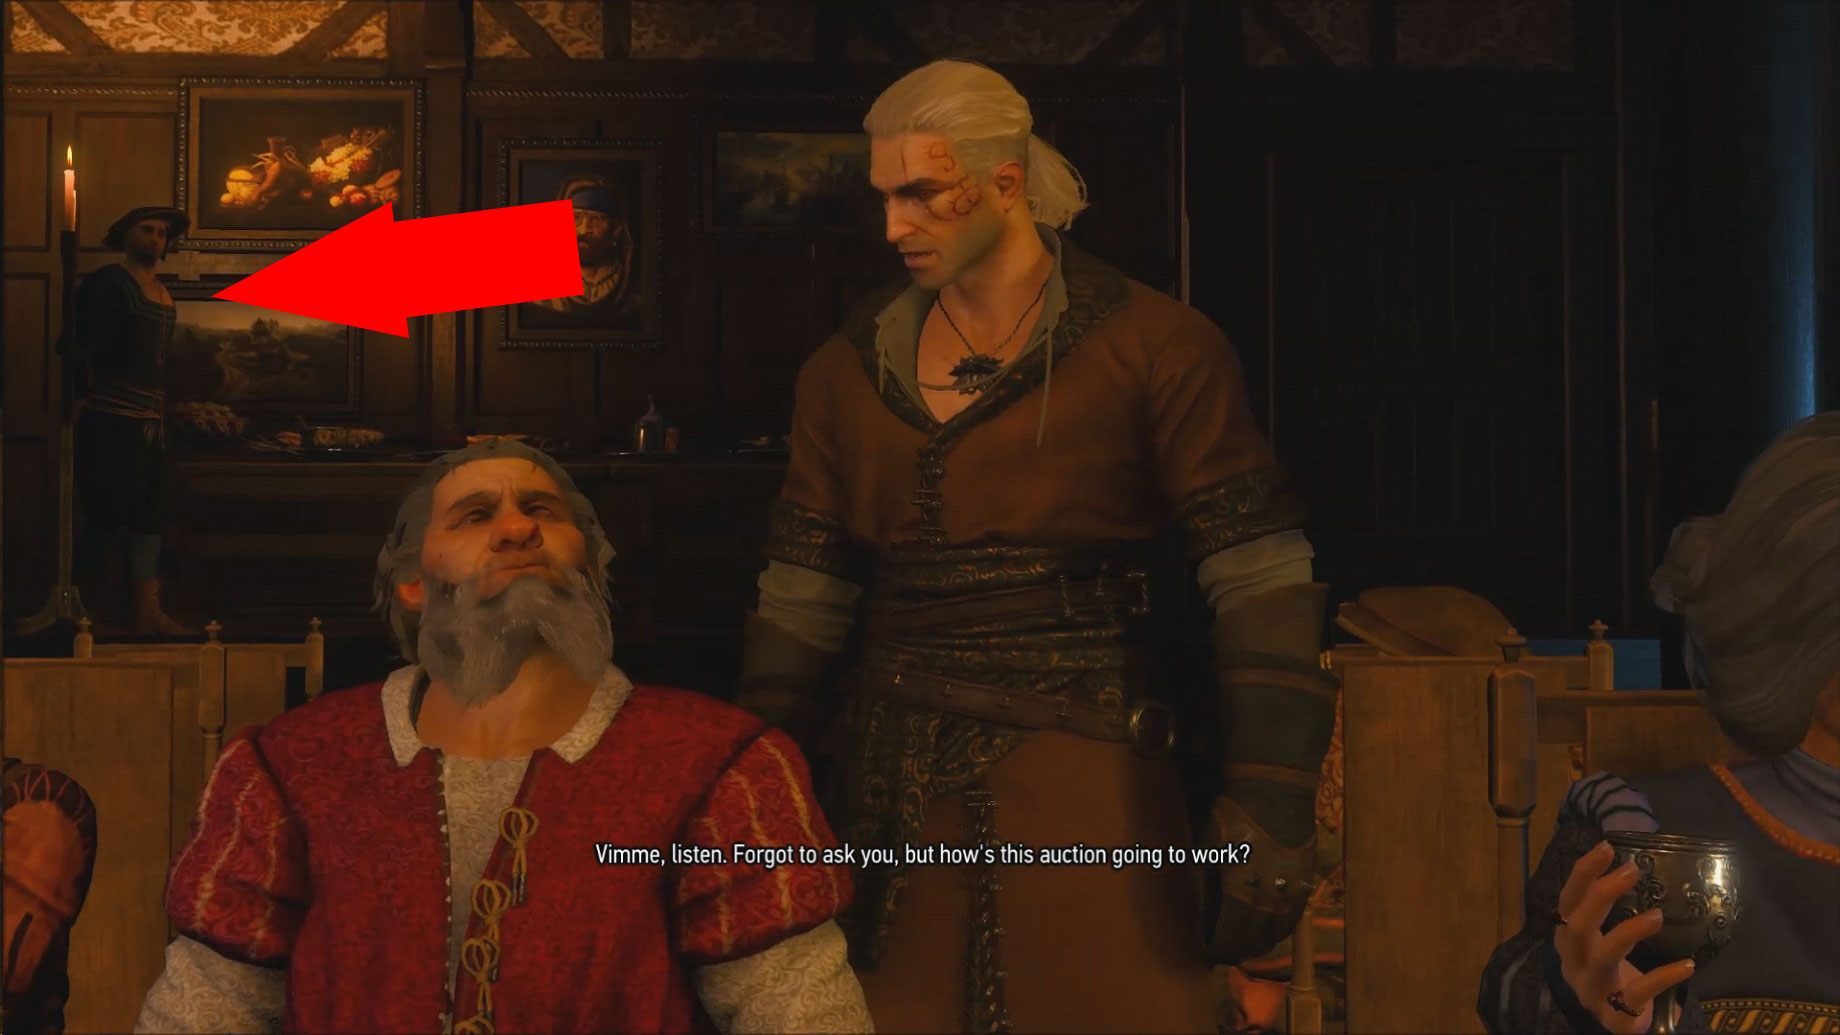 The Witcher 3 Riddle That Players Couldn’t Quite Solve